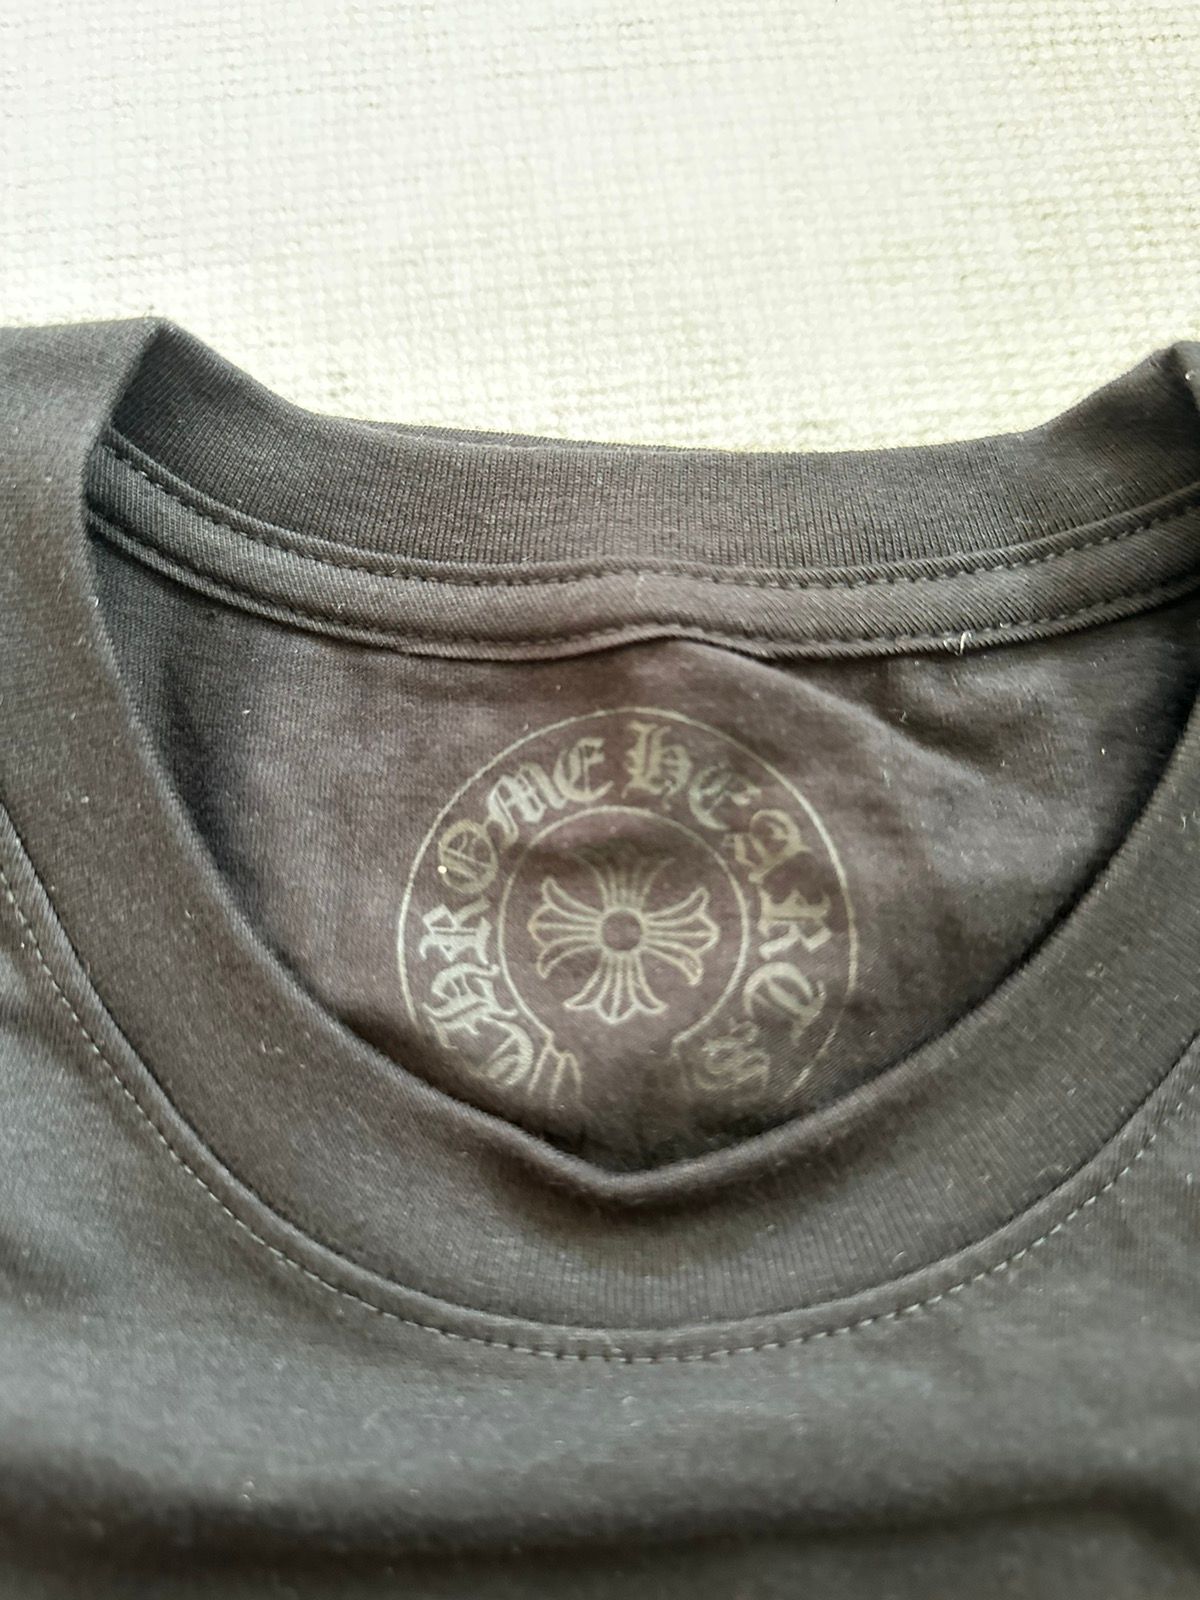 Chrome Hearts Chrome Hearts Scroll Logo NYC exclusive Tee Size US S / EU 44-46 / 1 - 8 Preview